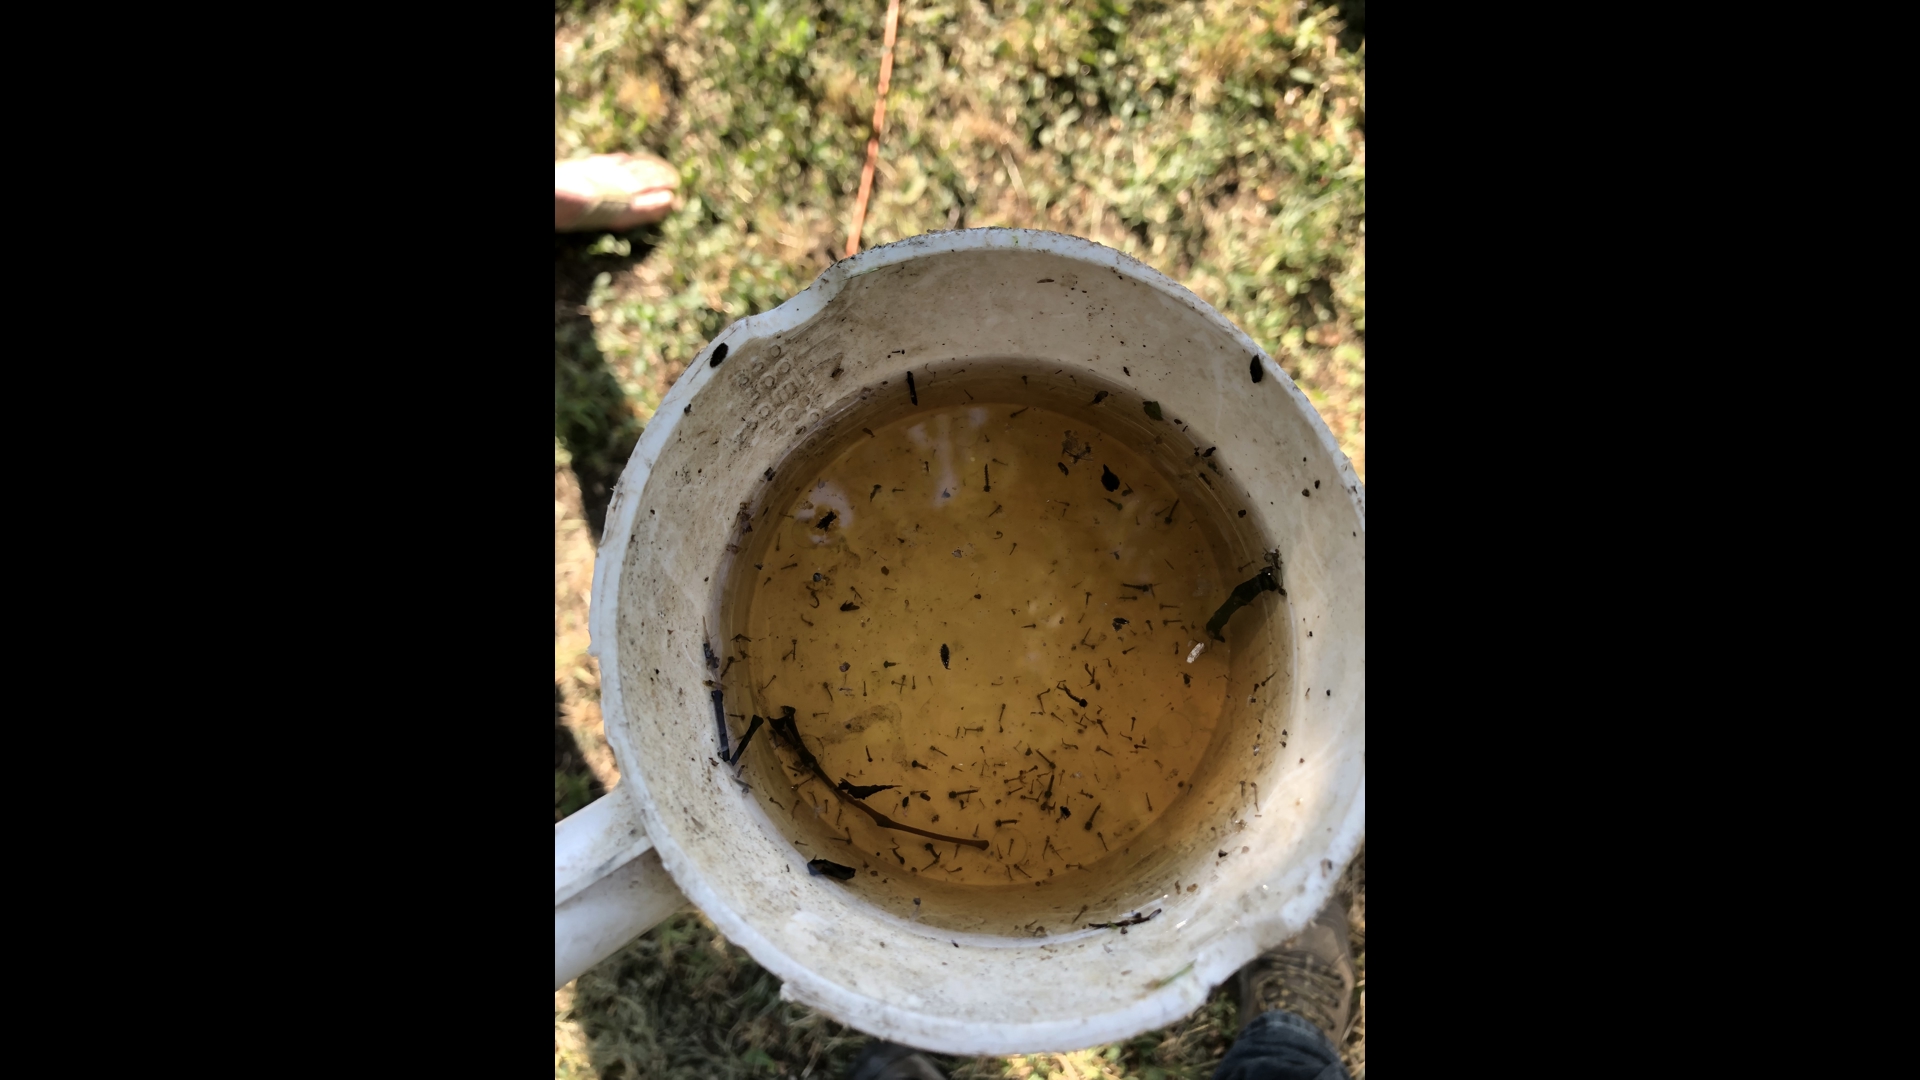 Mosquito larvae found during inspection.